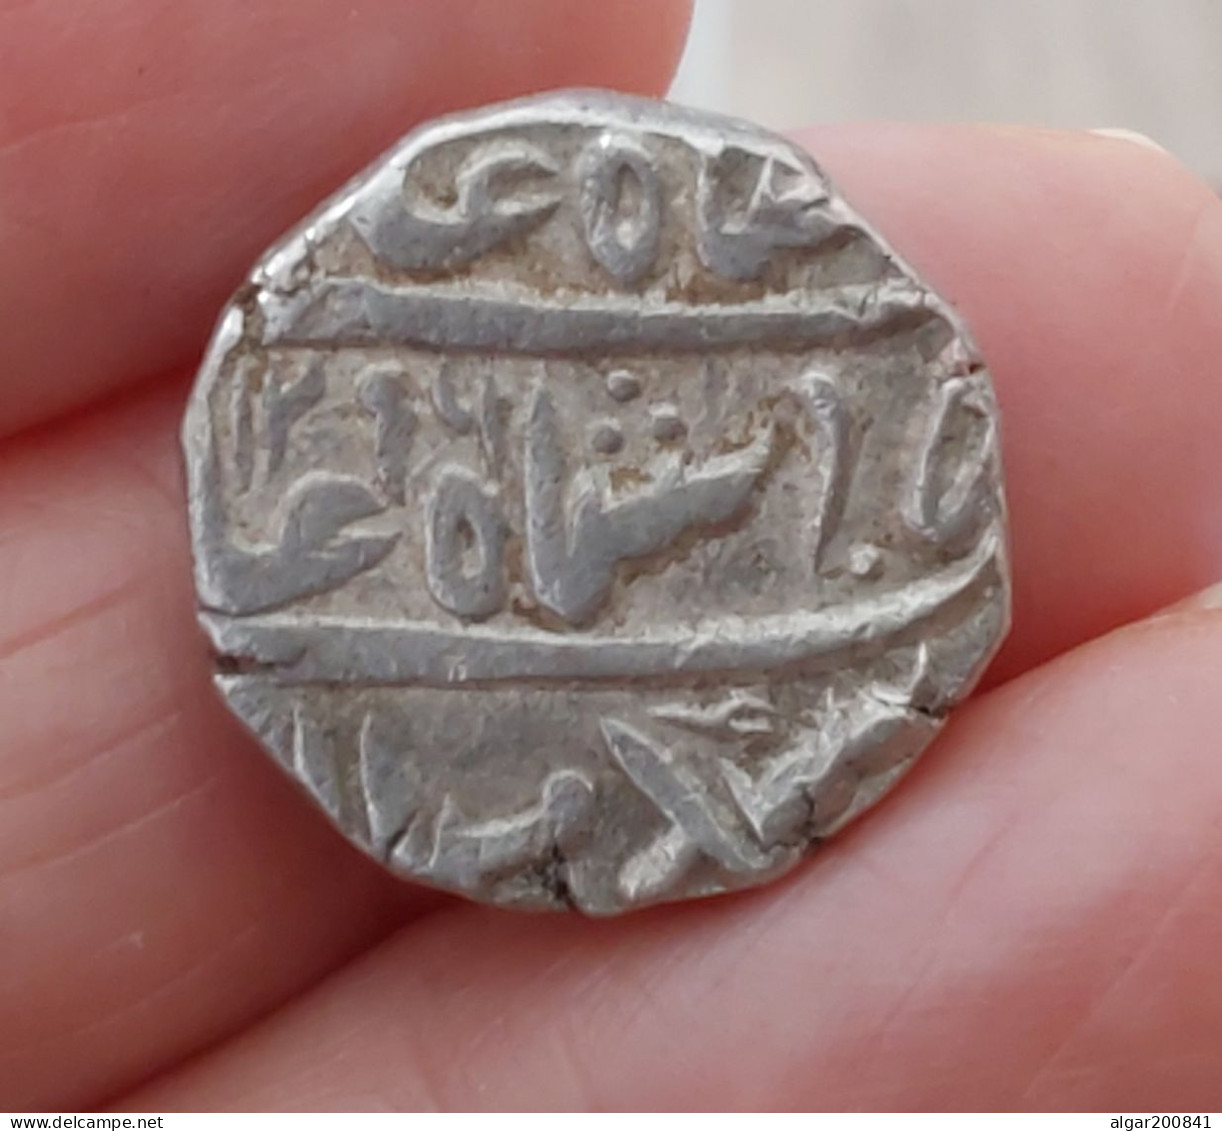 India - Silver Rupee - Unknown State. - India